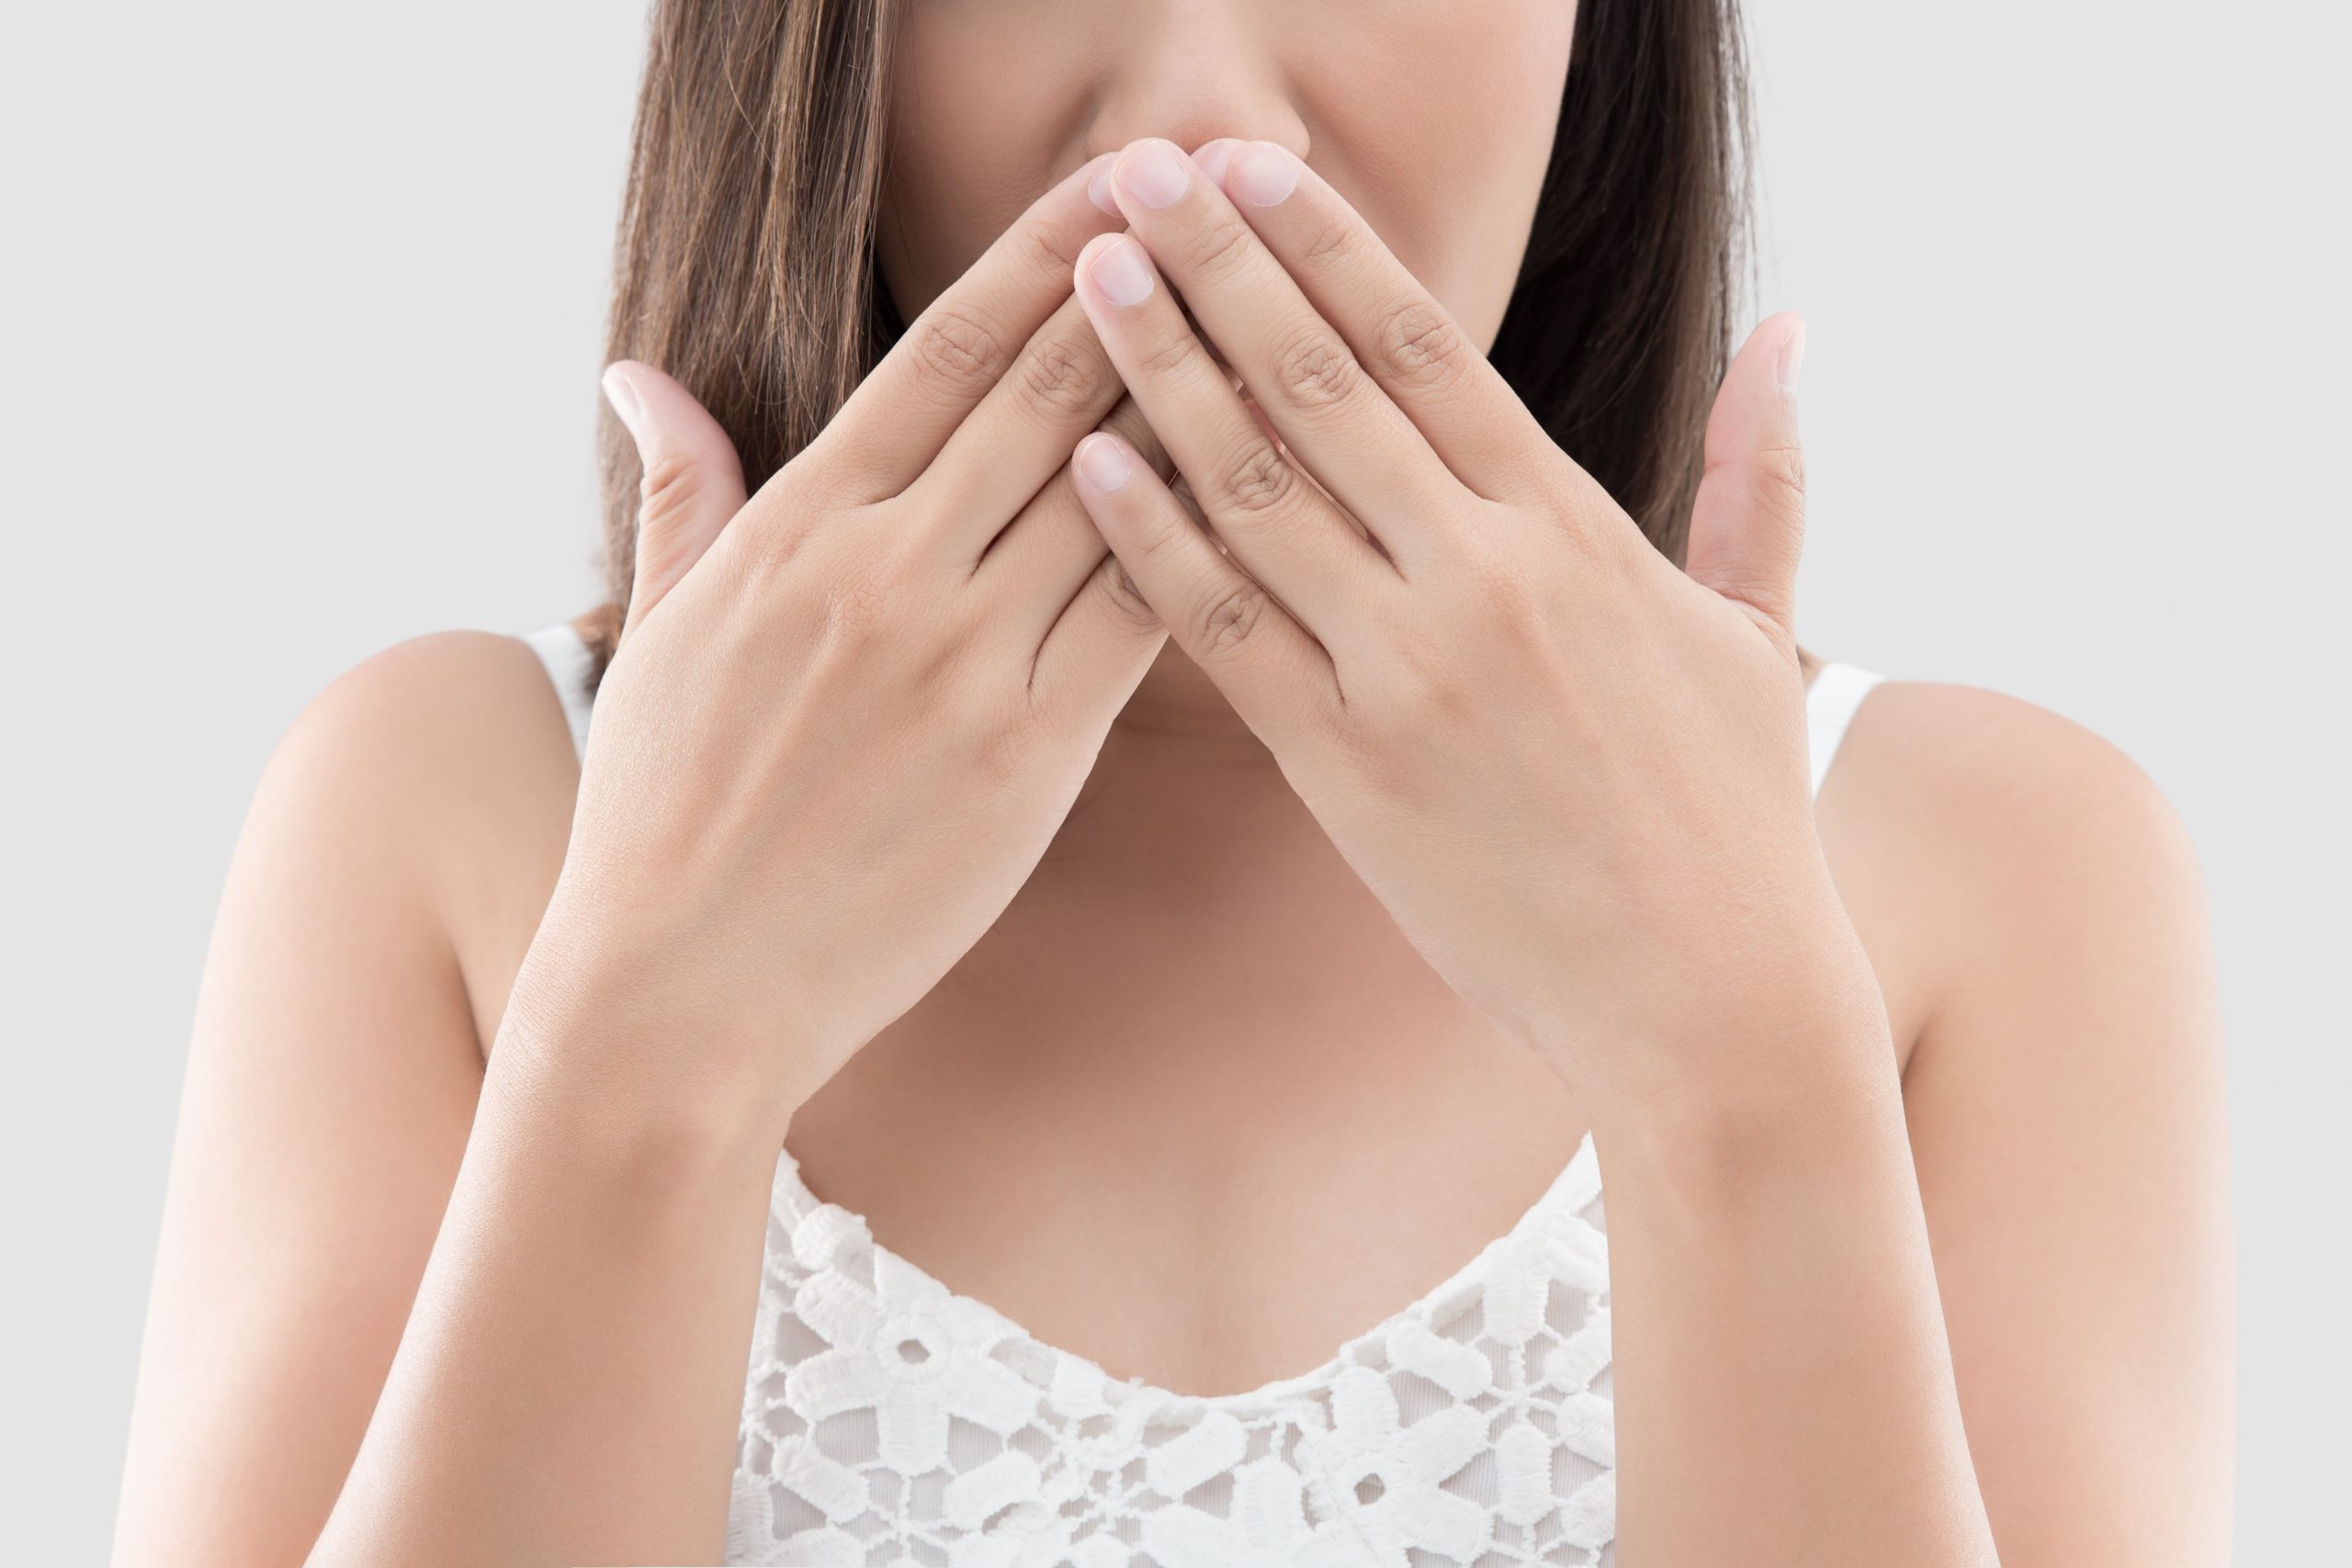 Woman with hands covering mouth, indicating embarrassment or bad breath